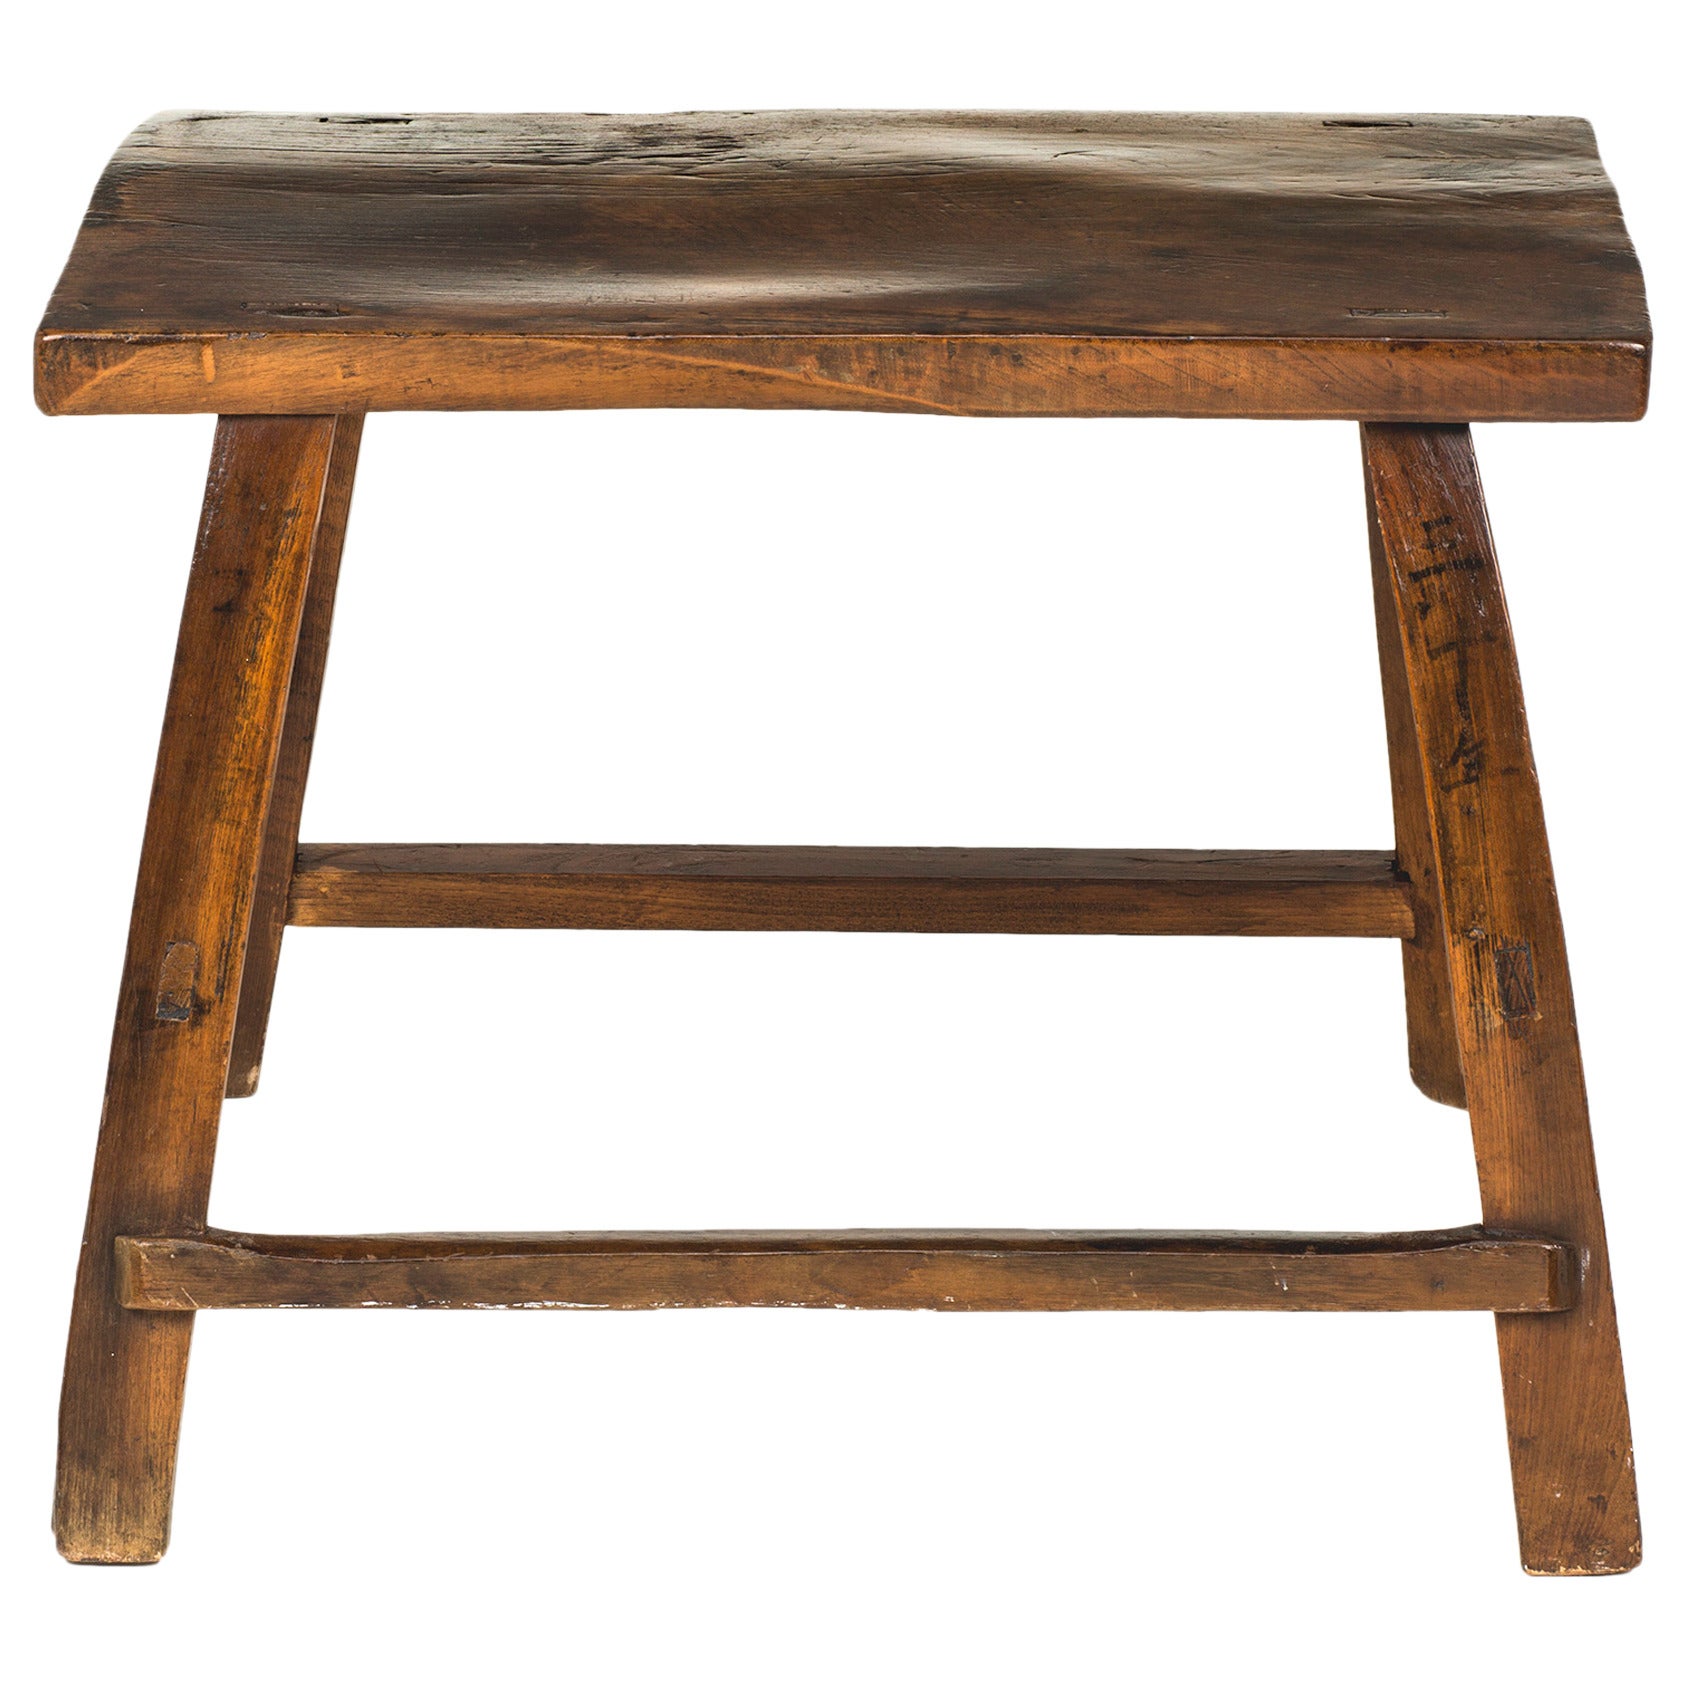 Primitive Chinese Elmwood Table or Bench